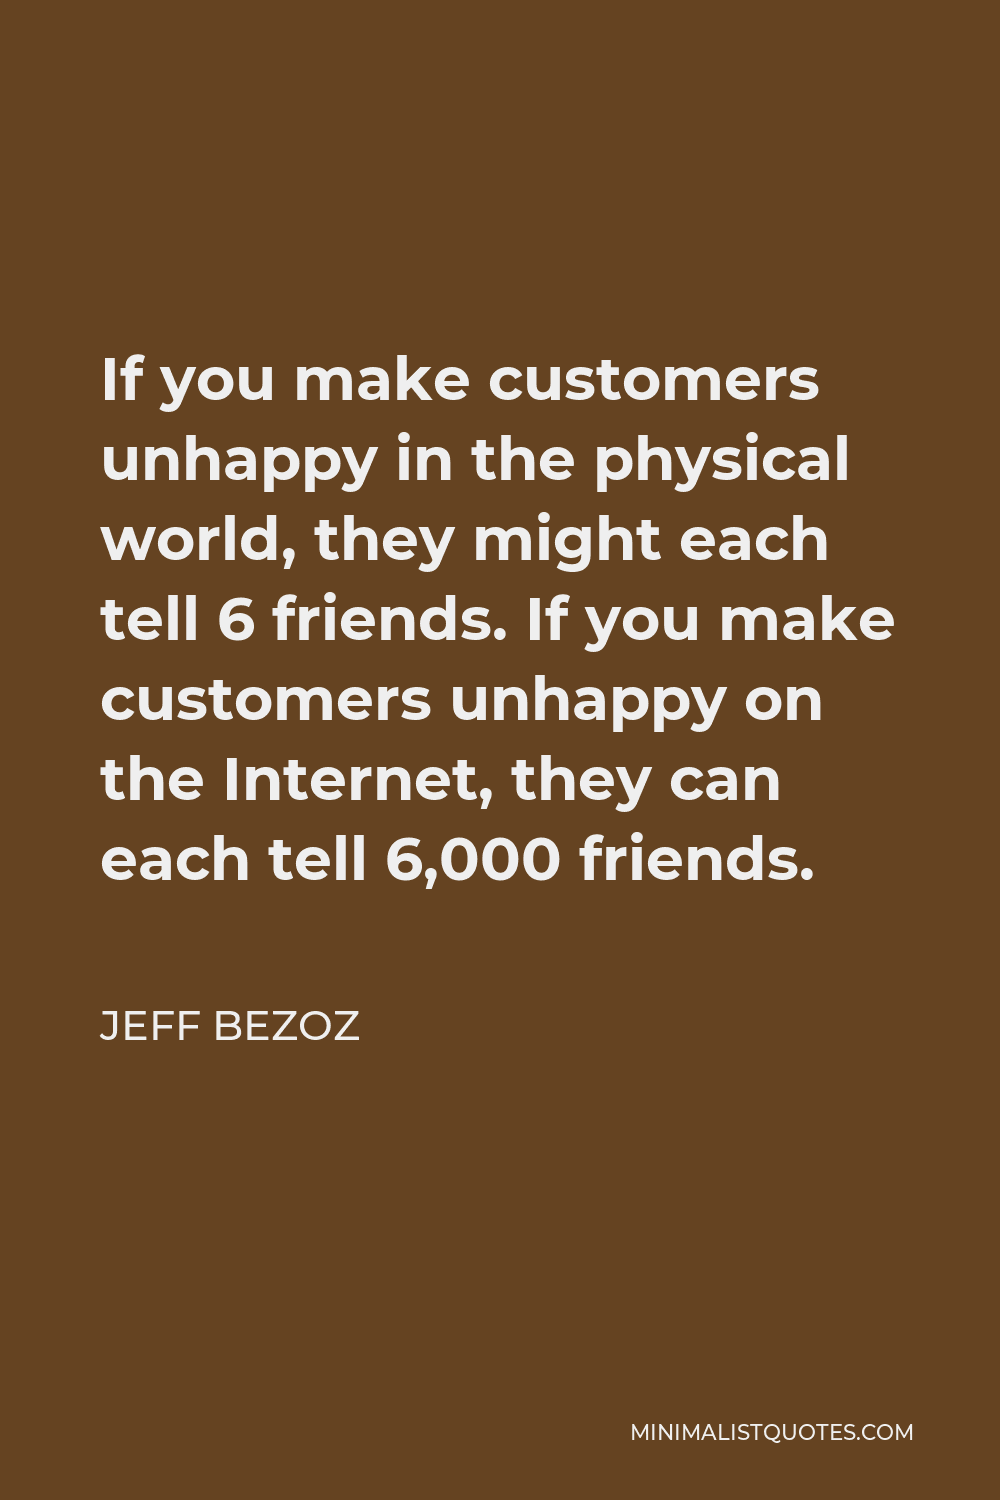 Jeff Bezoz Quote - If you make customers unhappy in the physical world, they might each tell 6 friends. If you make customers unhappy on the Internet, they can each tell 6,000 friends.